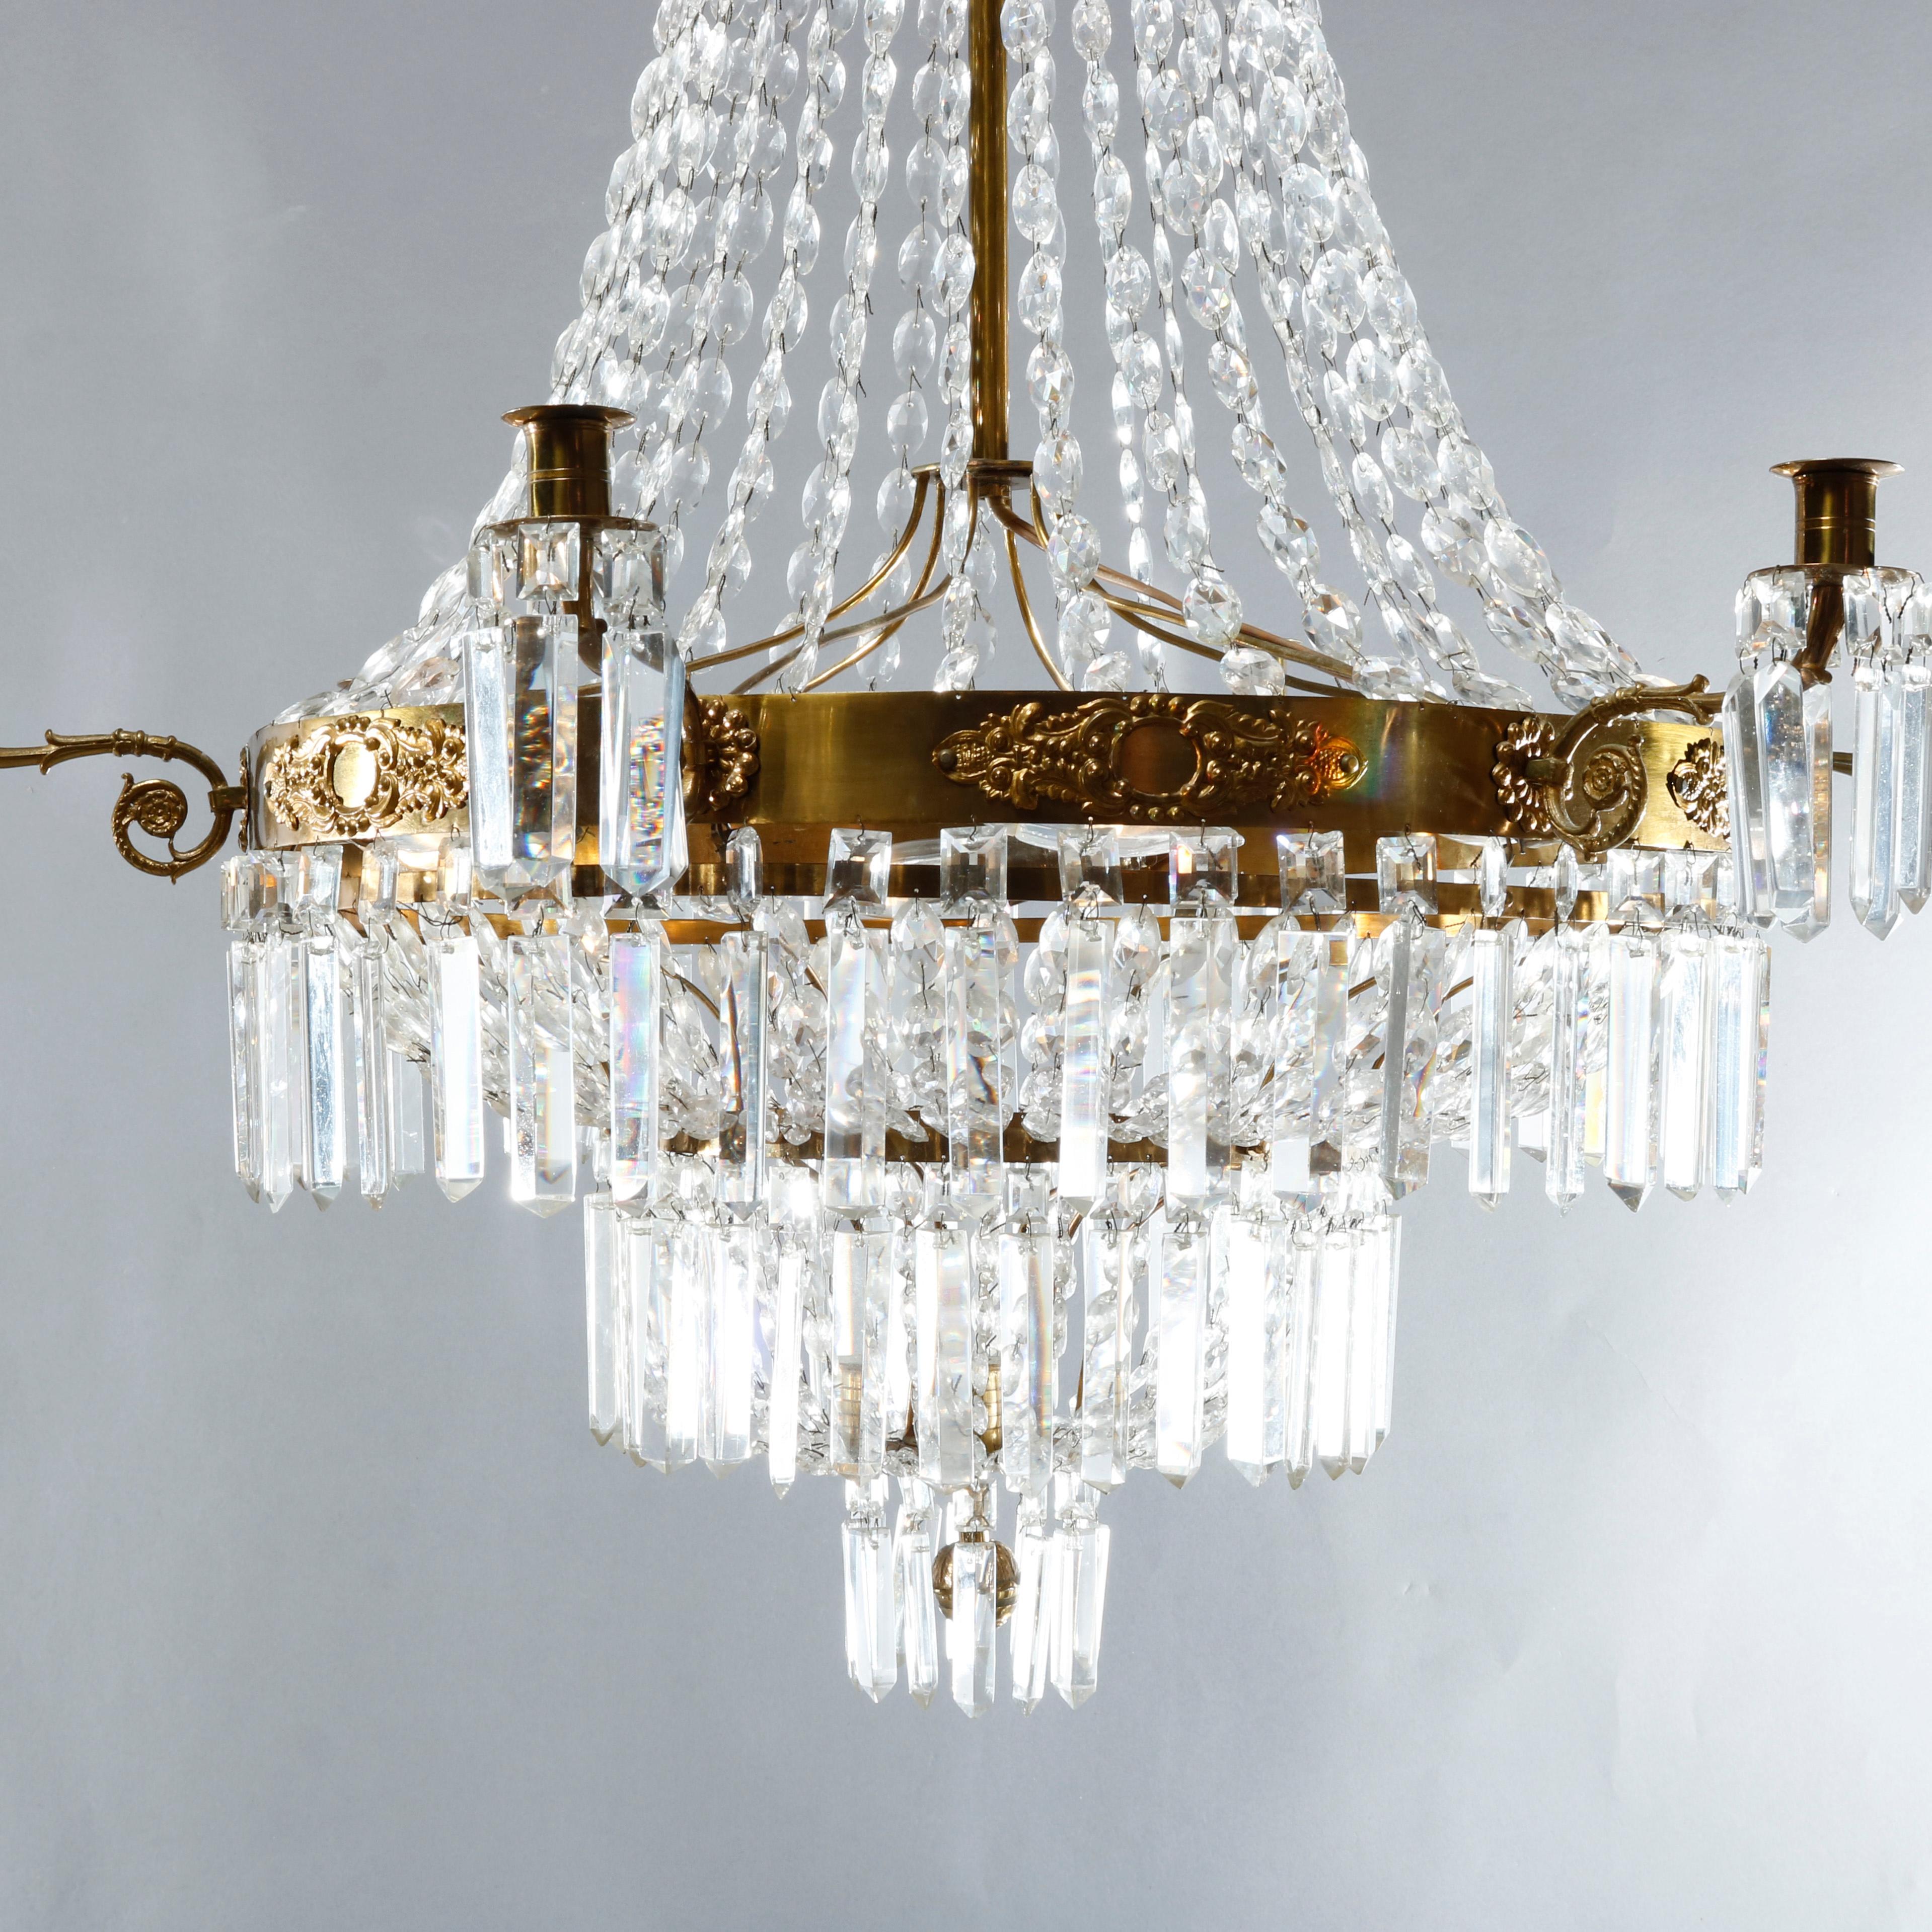 An antique French style chandelier offers tiered wedding cake form with bronzed metal frame having foliate elements on collar with scroll form arms terminating in candle lights with strung and cut crystals throughout, 20th century.

Measures: 46